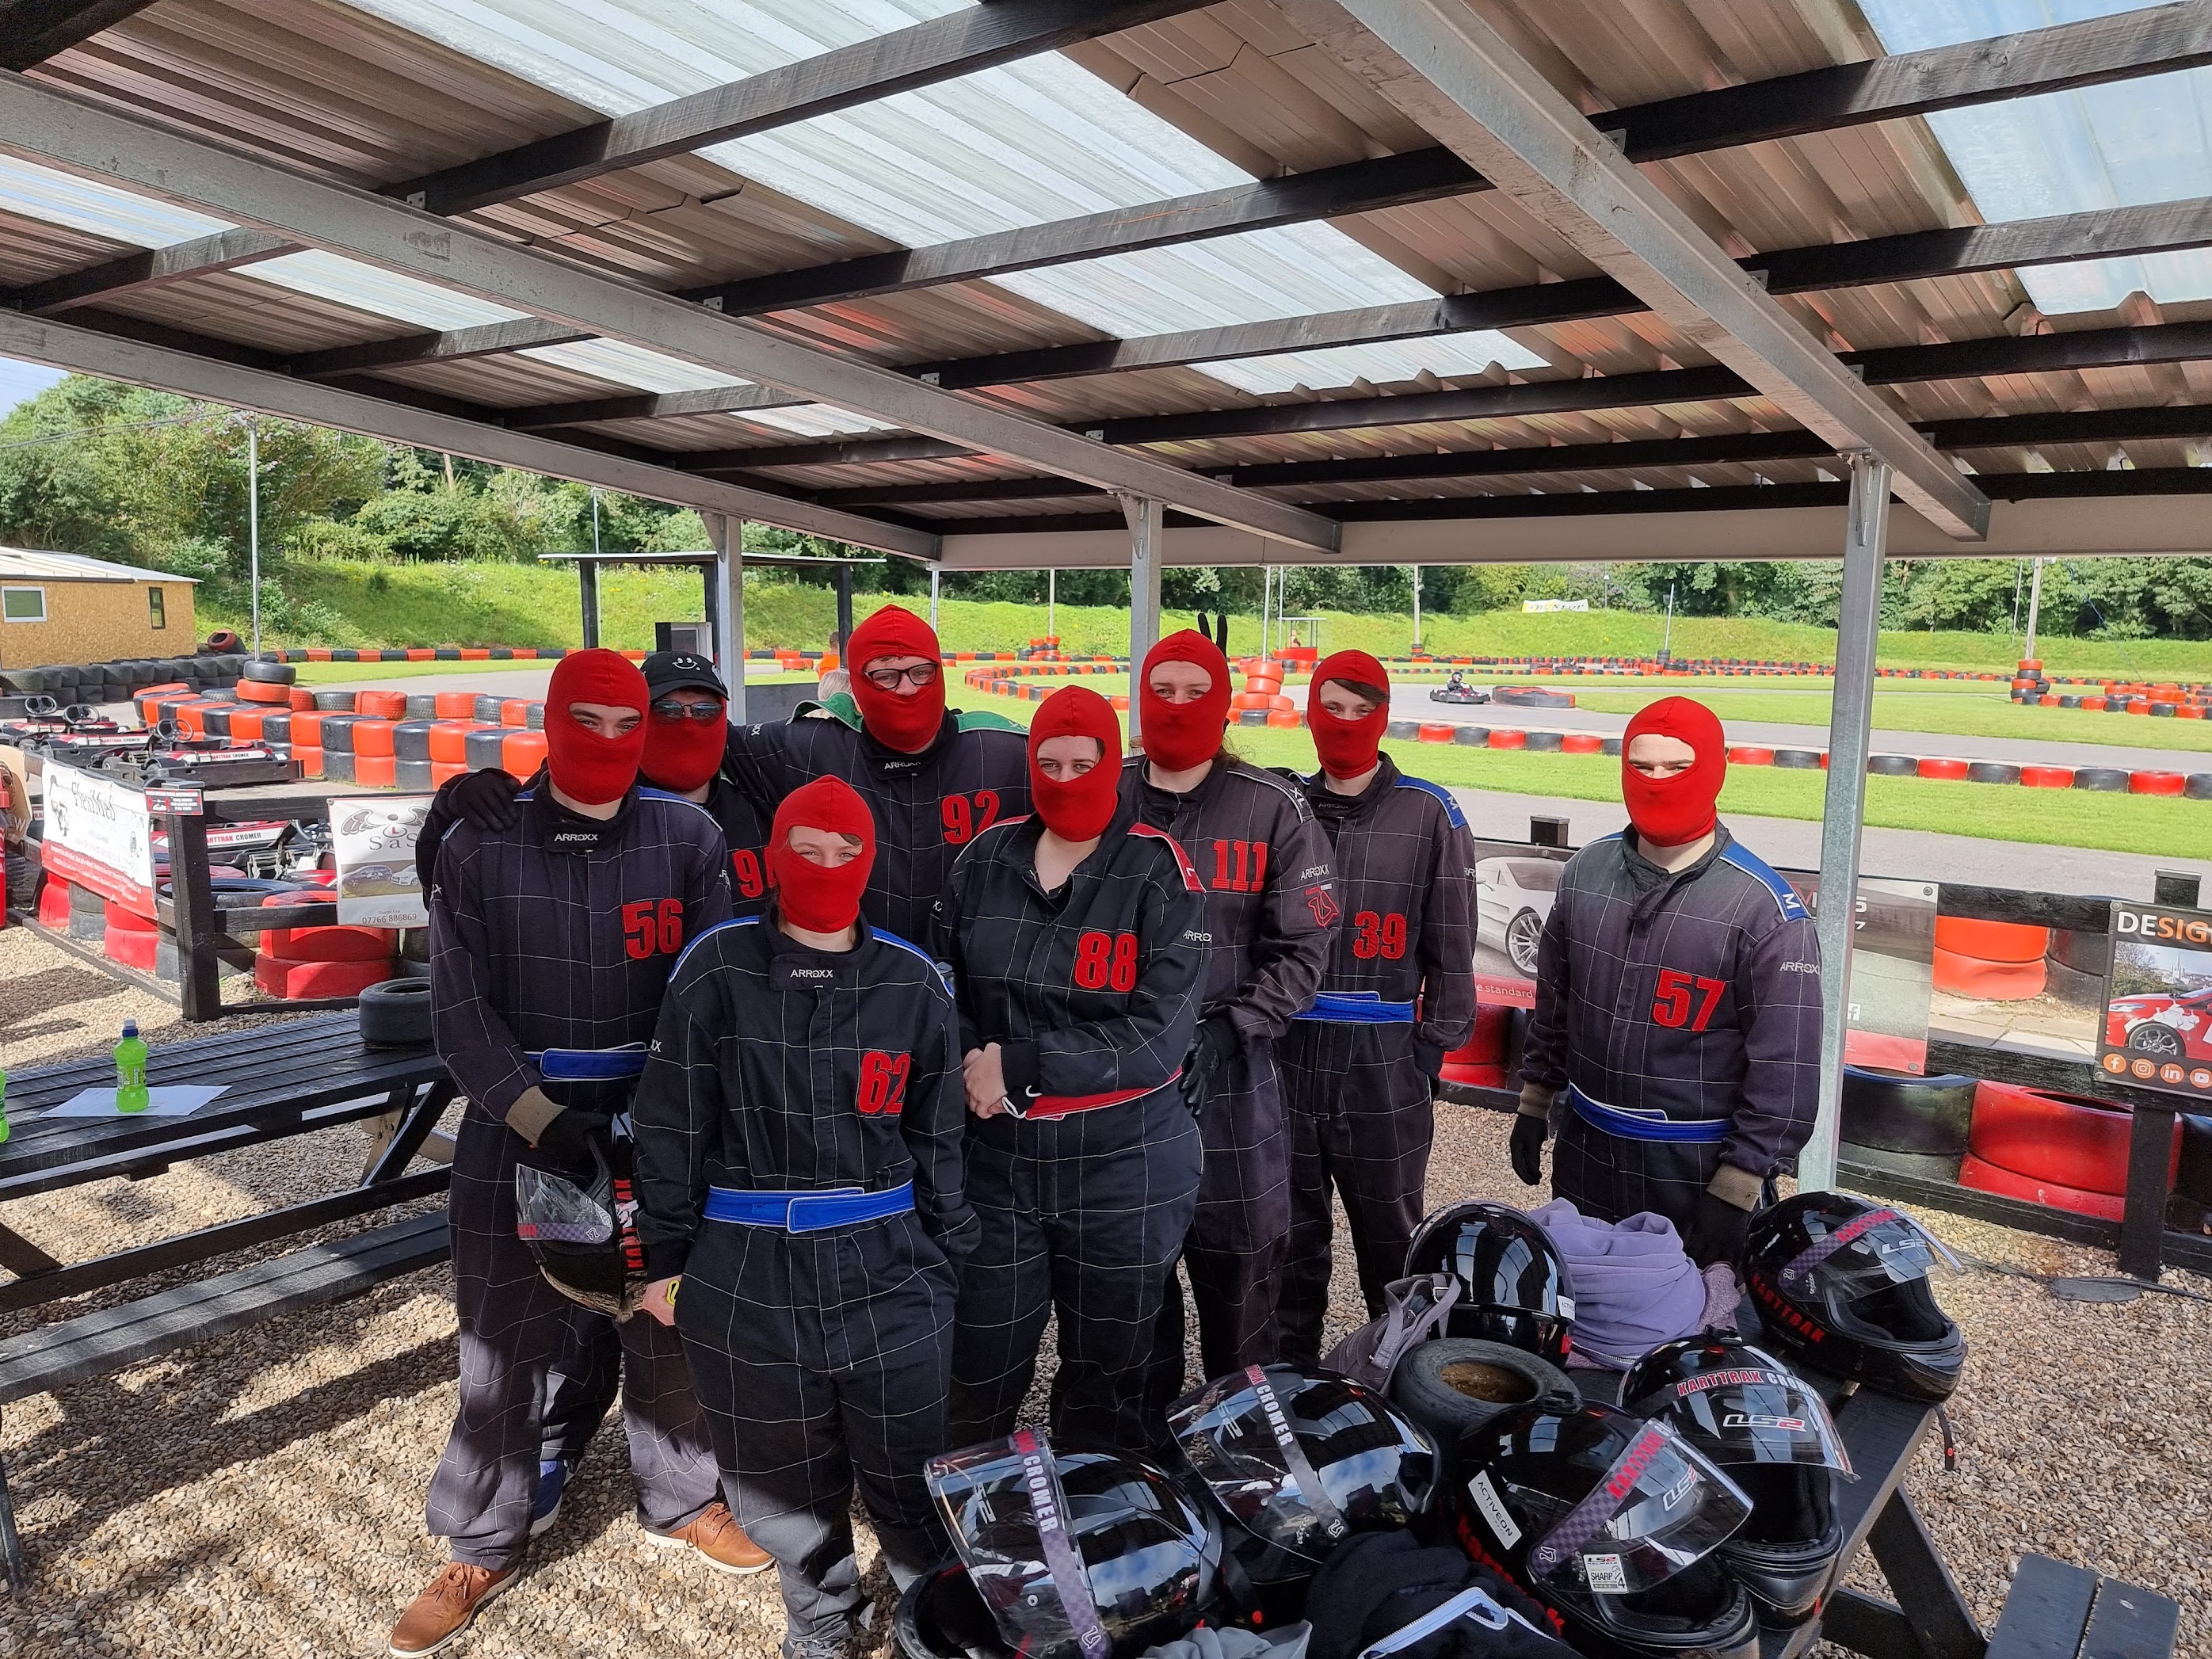 A photo of us all as a group dressed up in race suits before we go out racing go karts